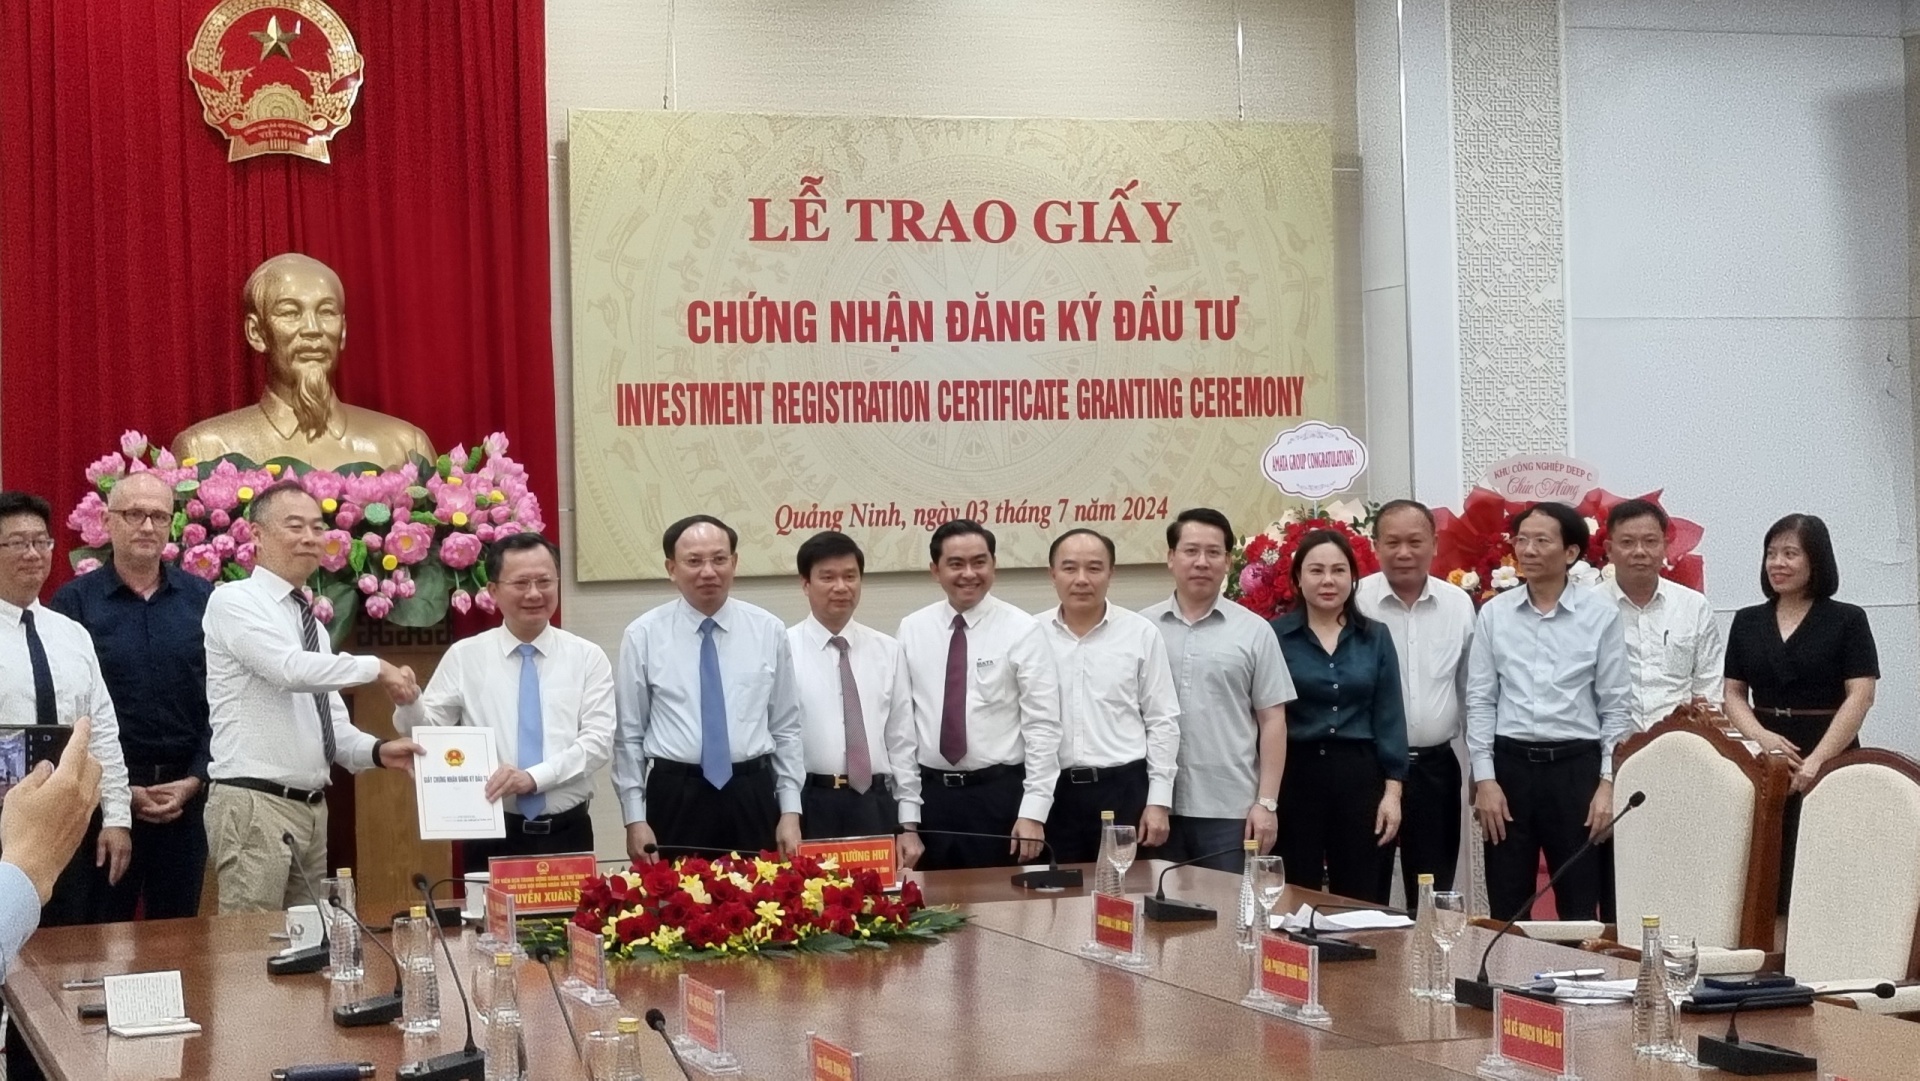 Foxconn pledges further $550 million investment in Quang Ninh